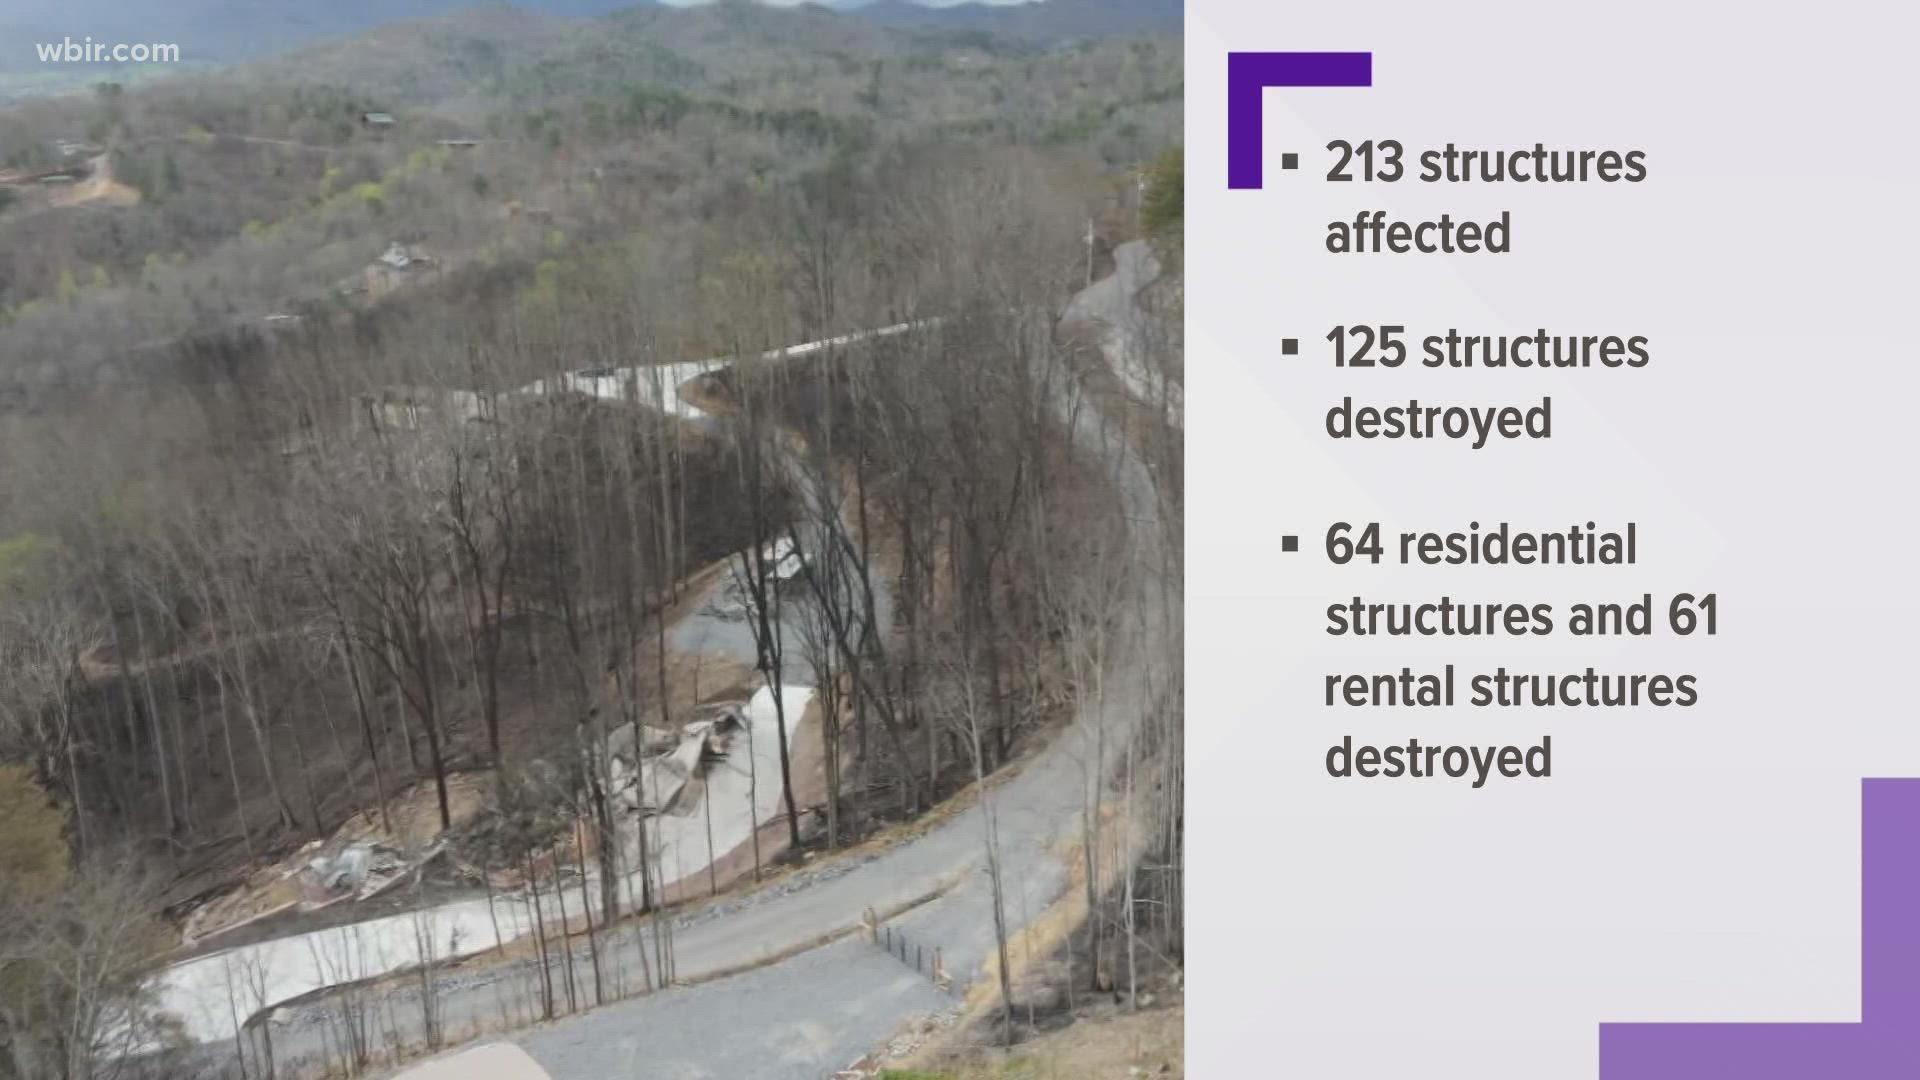 125 structures were destroyed. Of those destroyed, 64 were residences and 61 were rental properties.